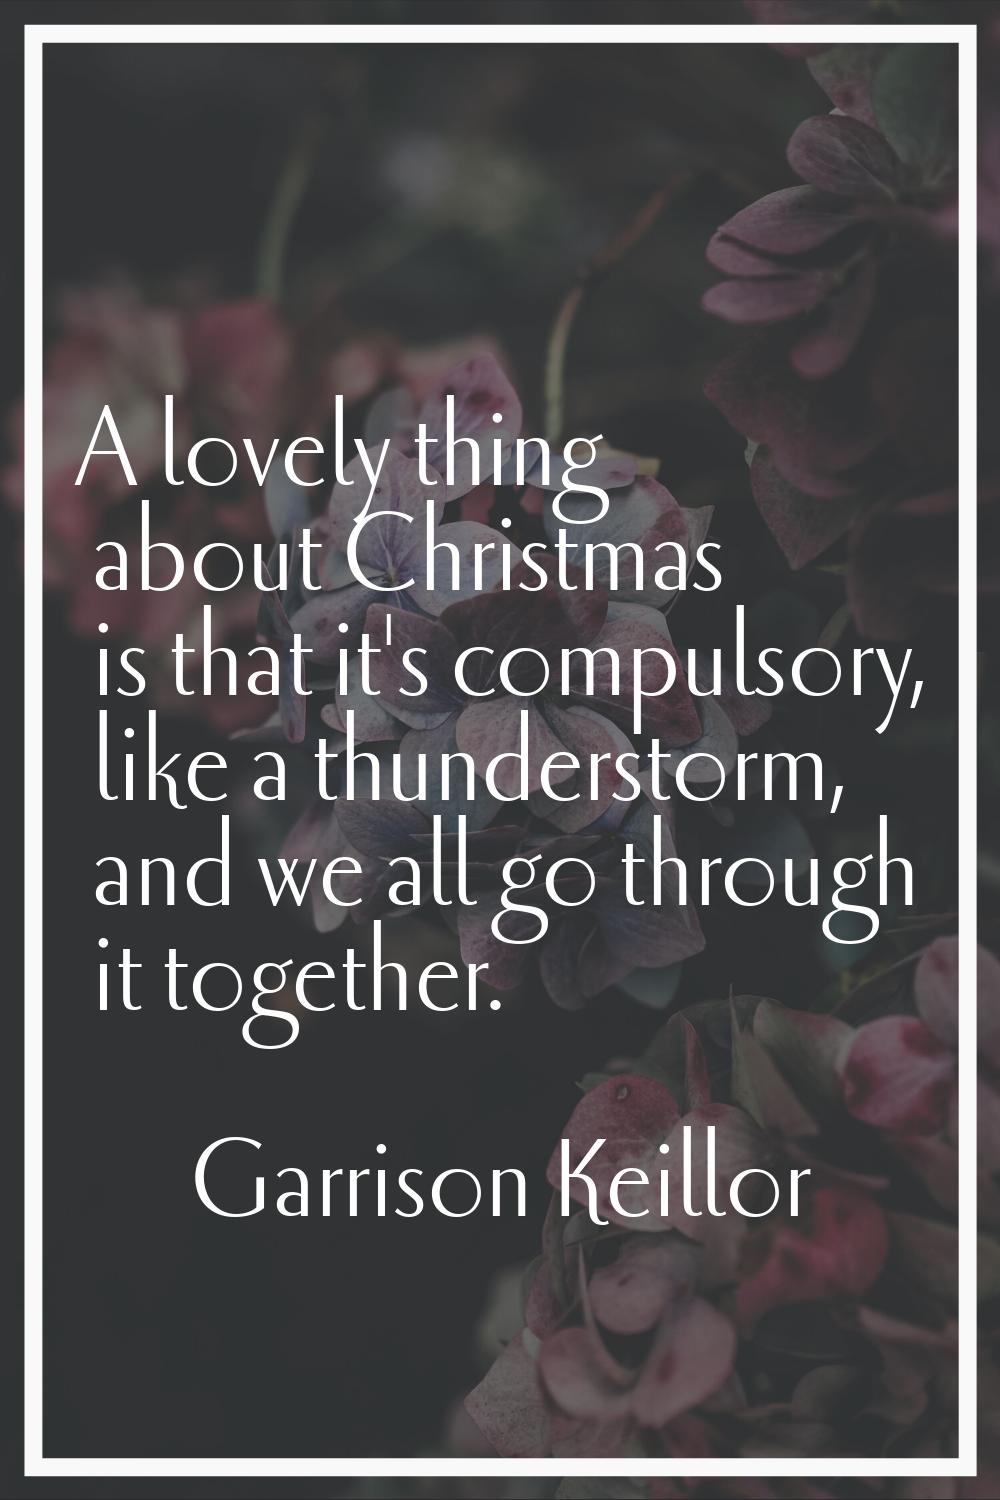 A lovely thing about Christmas is that it's compulsory, like a thunderstorm, and we all go through 